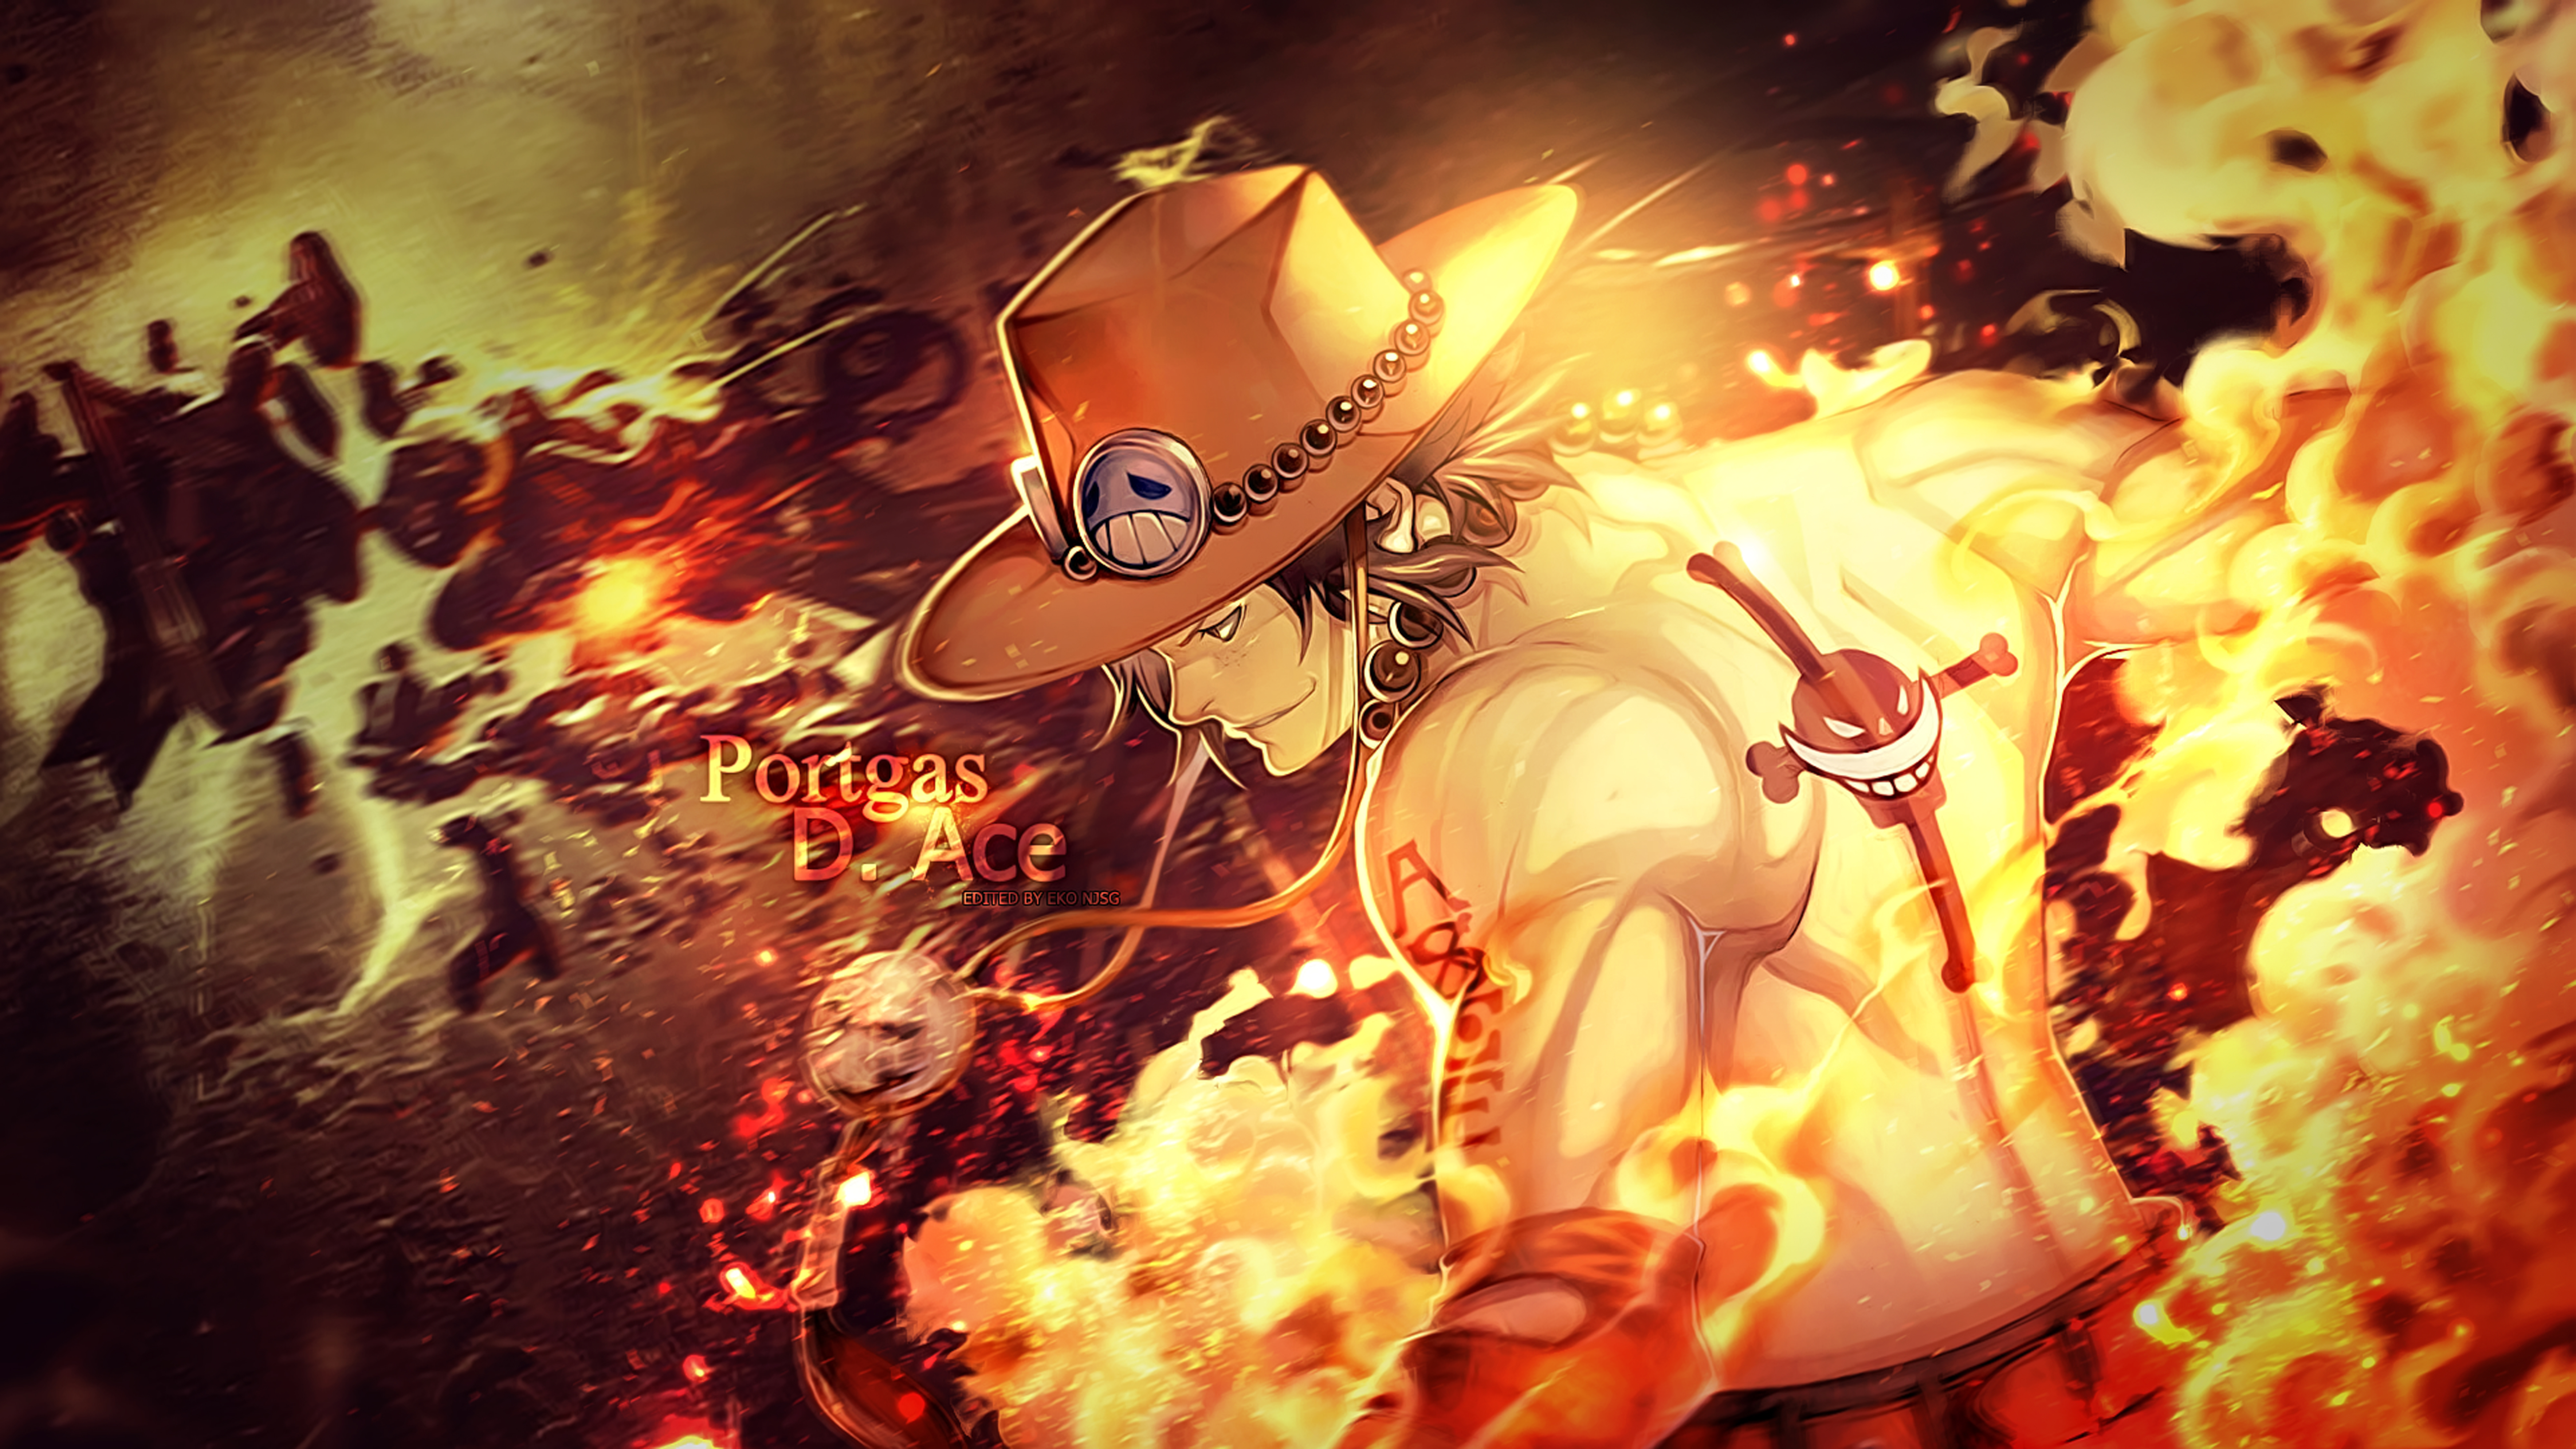 one piece ace wallpaper,cg artwork,illustration,fictional character,graphic design,anime